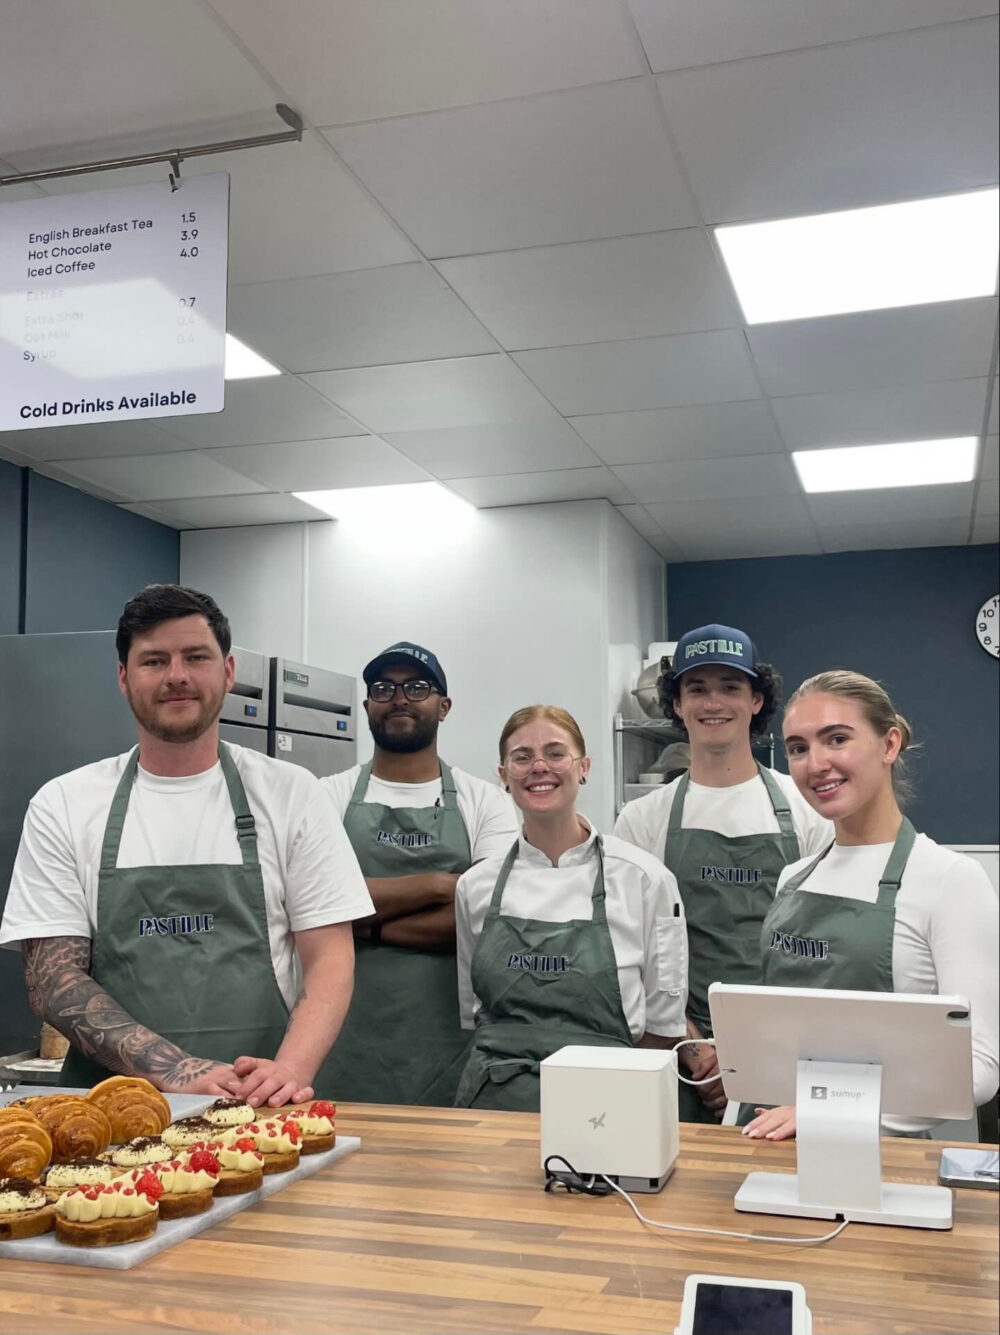 Jamie (left) with the team. Image provided by Pastille Bakery